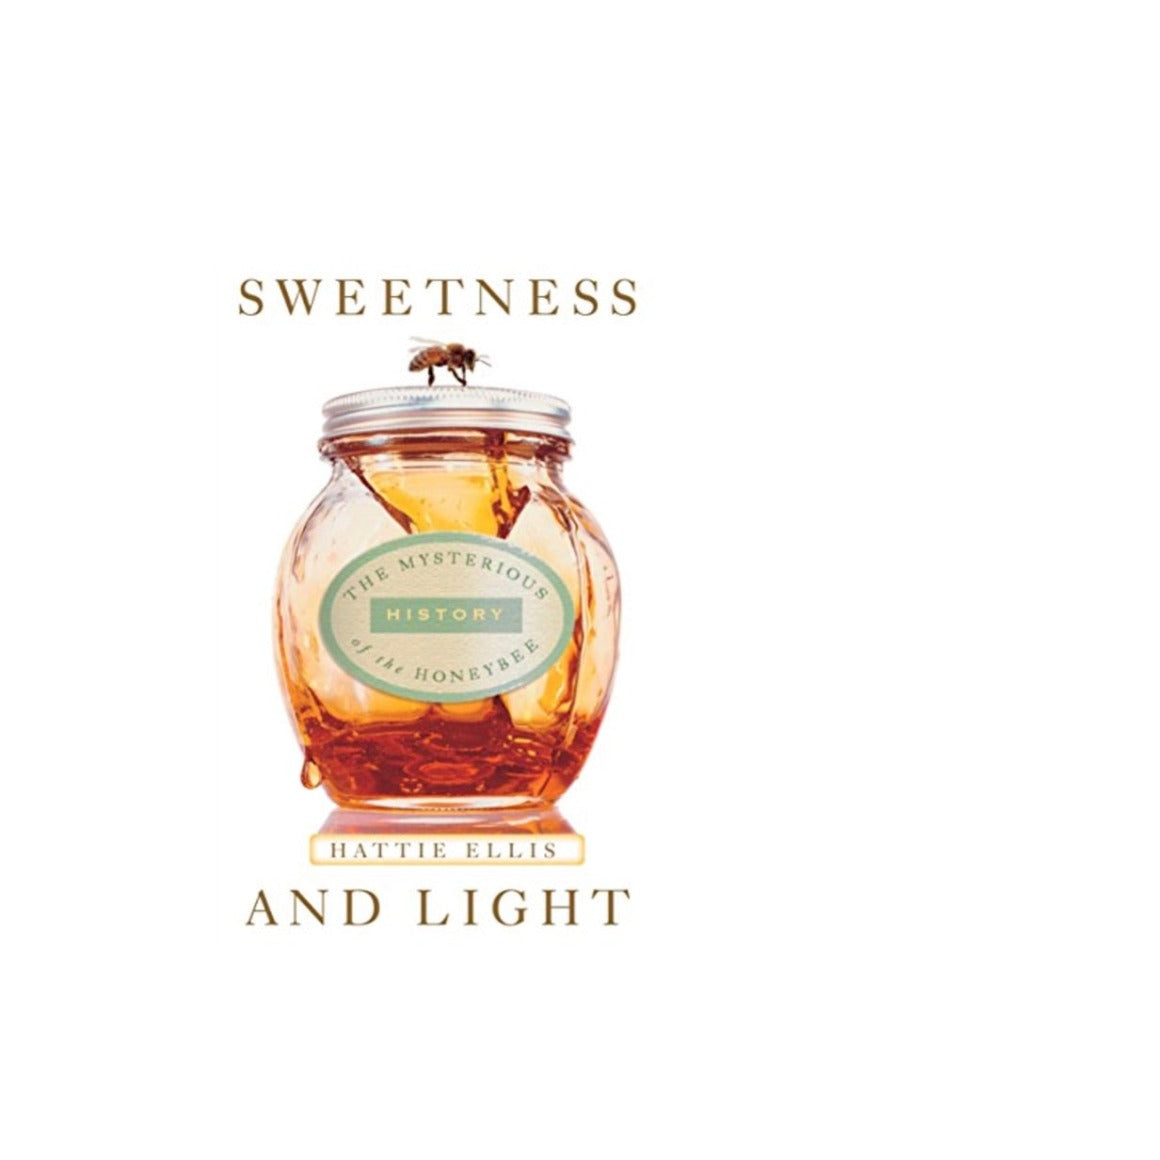 Sweetness and Light: The Mysterious History of the Honeybee by Hattie Ellis